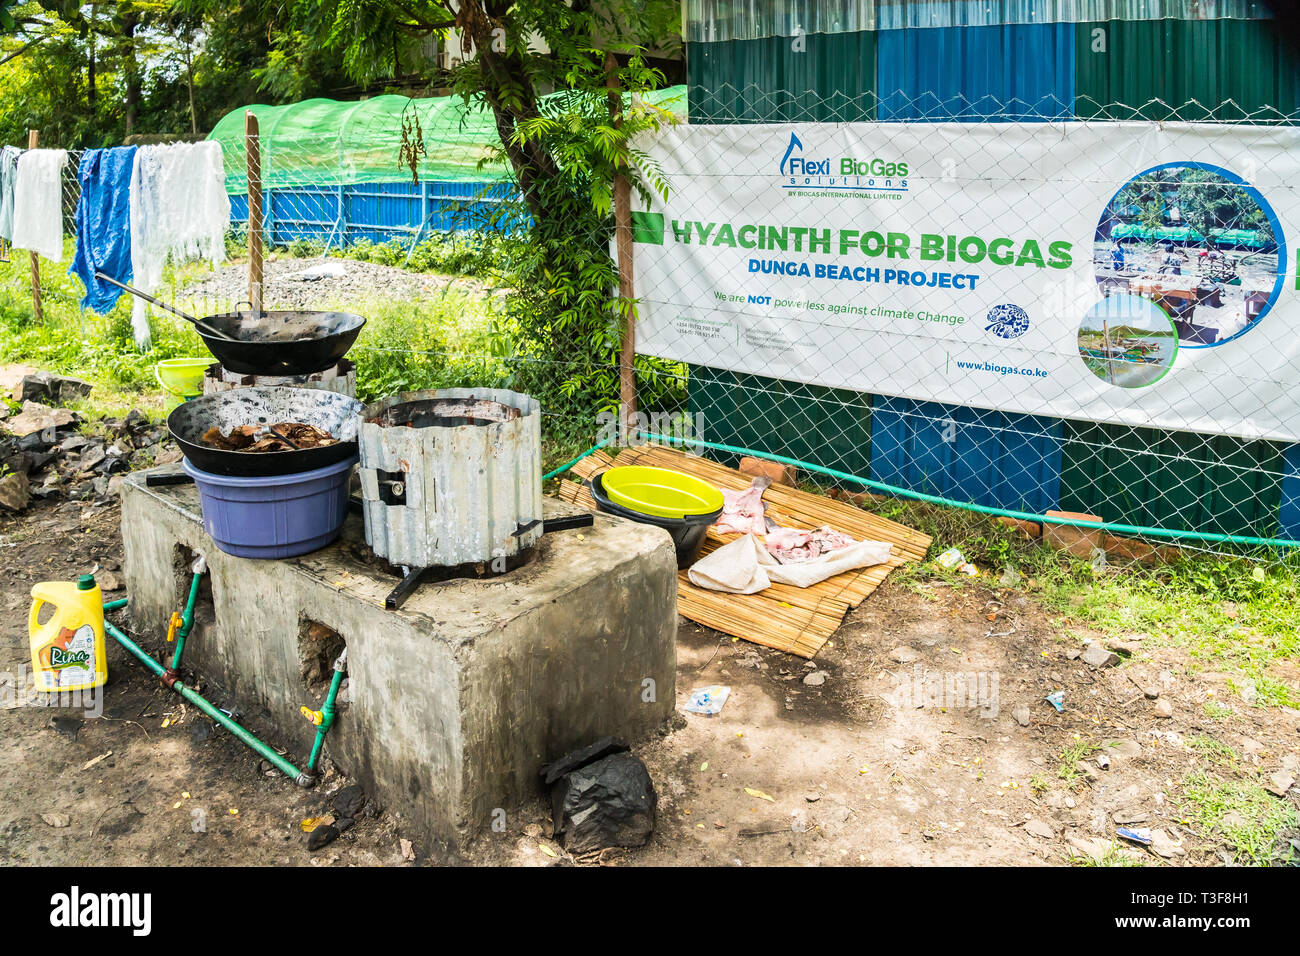 Kisumu,Kenya-March 8,2019 - biogas from hyacinth: the plant was brought over to Africa and spread prolifically, affecting transportation and fishing Stock Photo